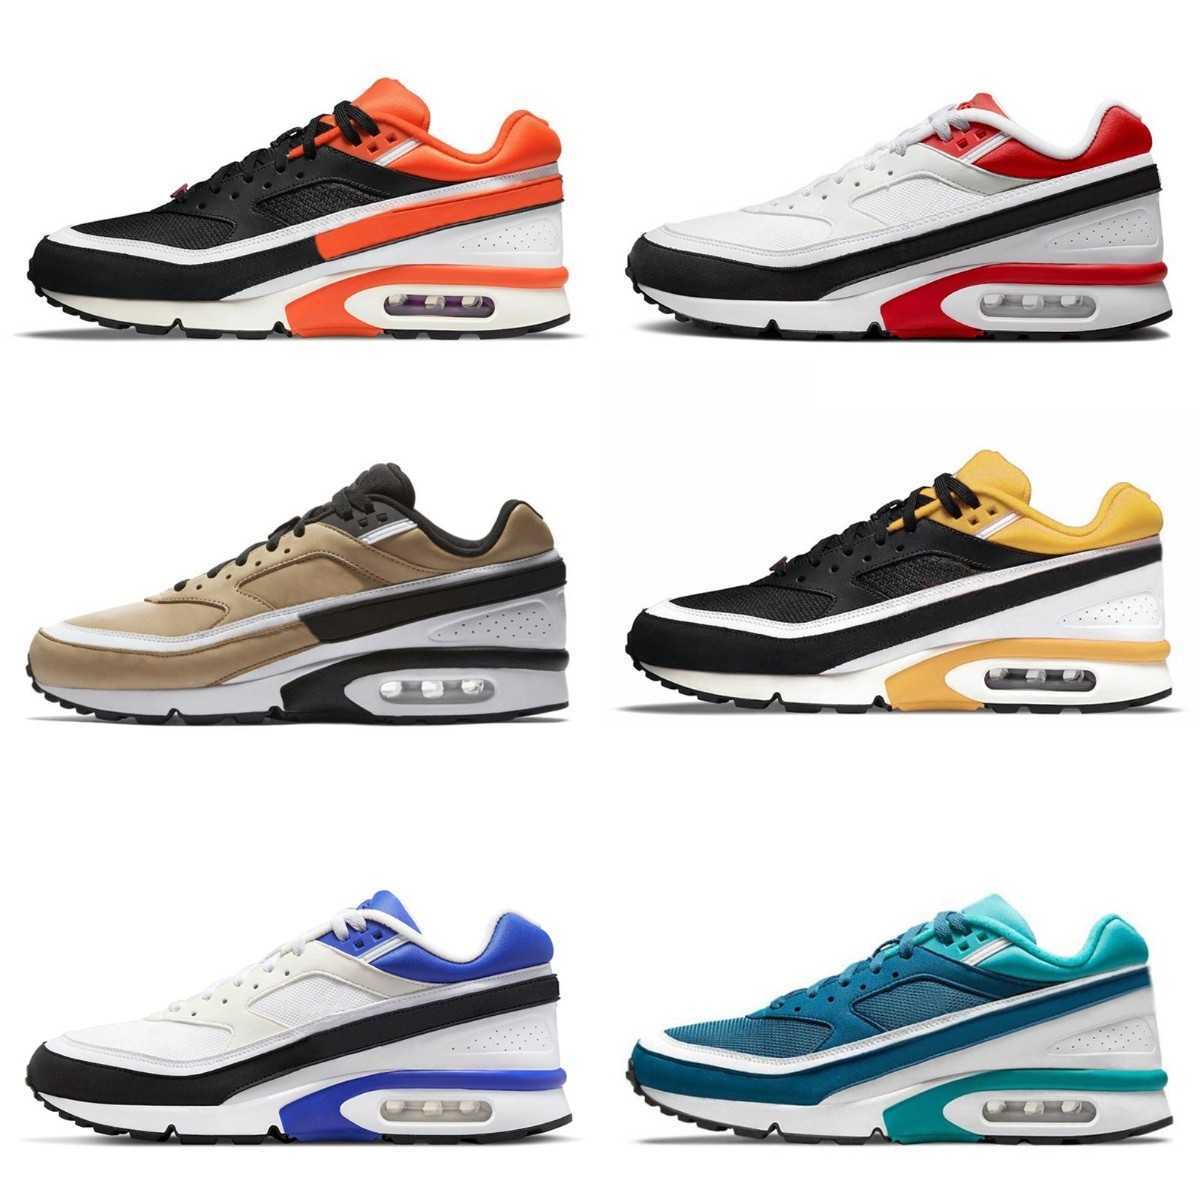 

Designer 2023 Mens Bw Shoes Reverse White Persian Violet Sport Red Trainers Sneakers Women Marina Light Stone Milk Jade Airs Rotterdam Lyon Los Angeles Sneakers Y88, Please contact us